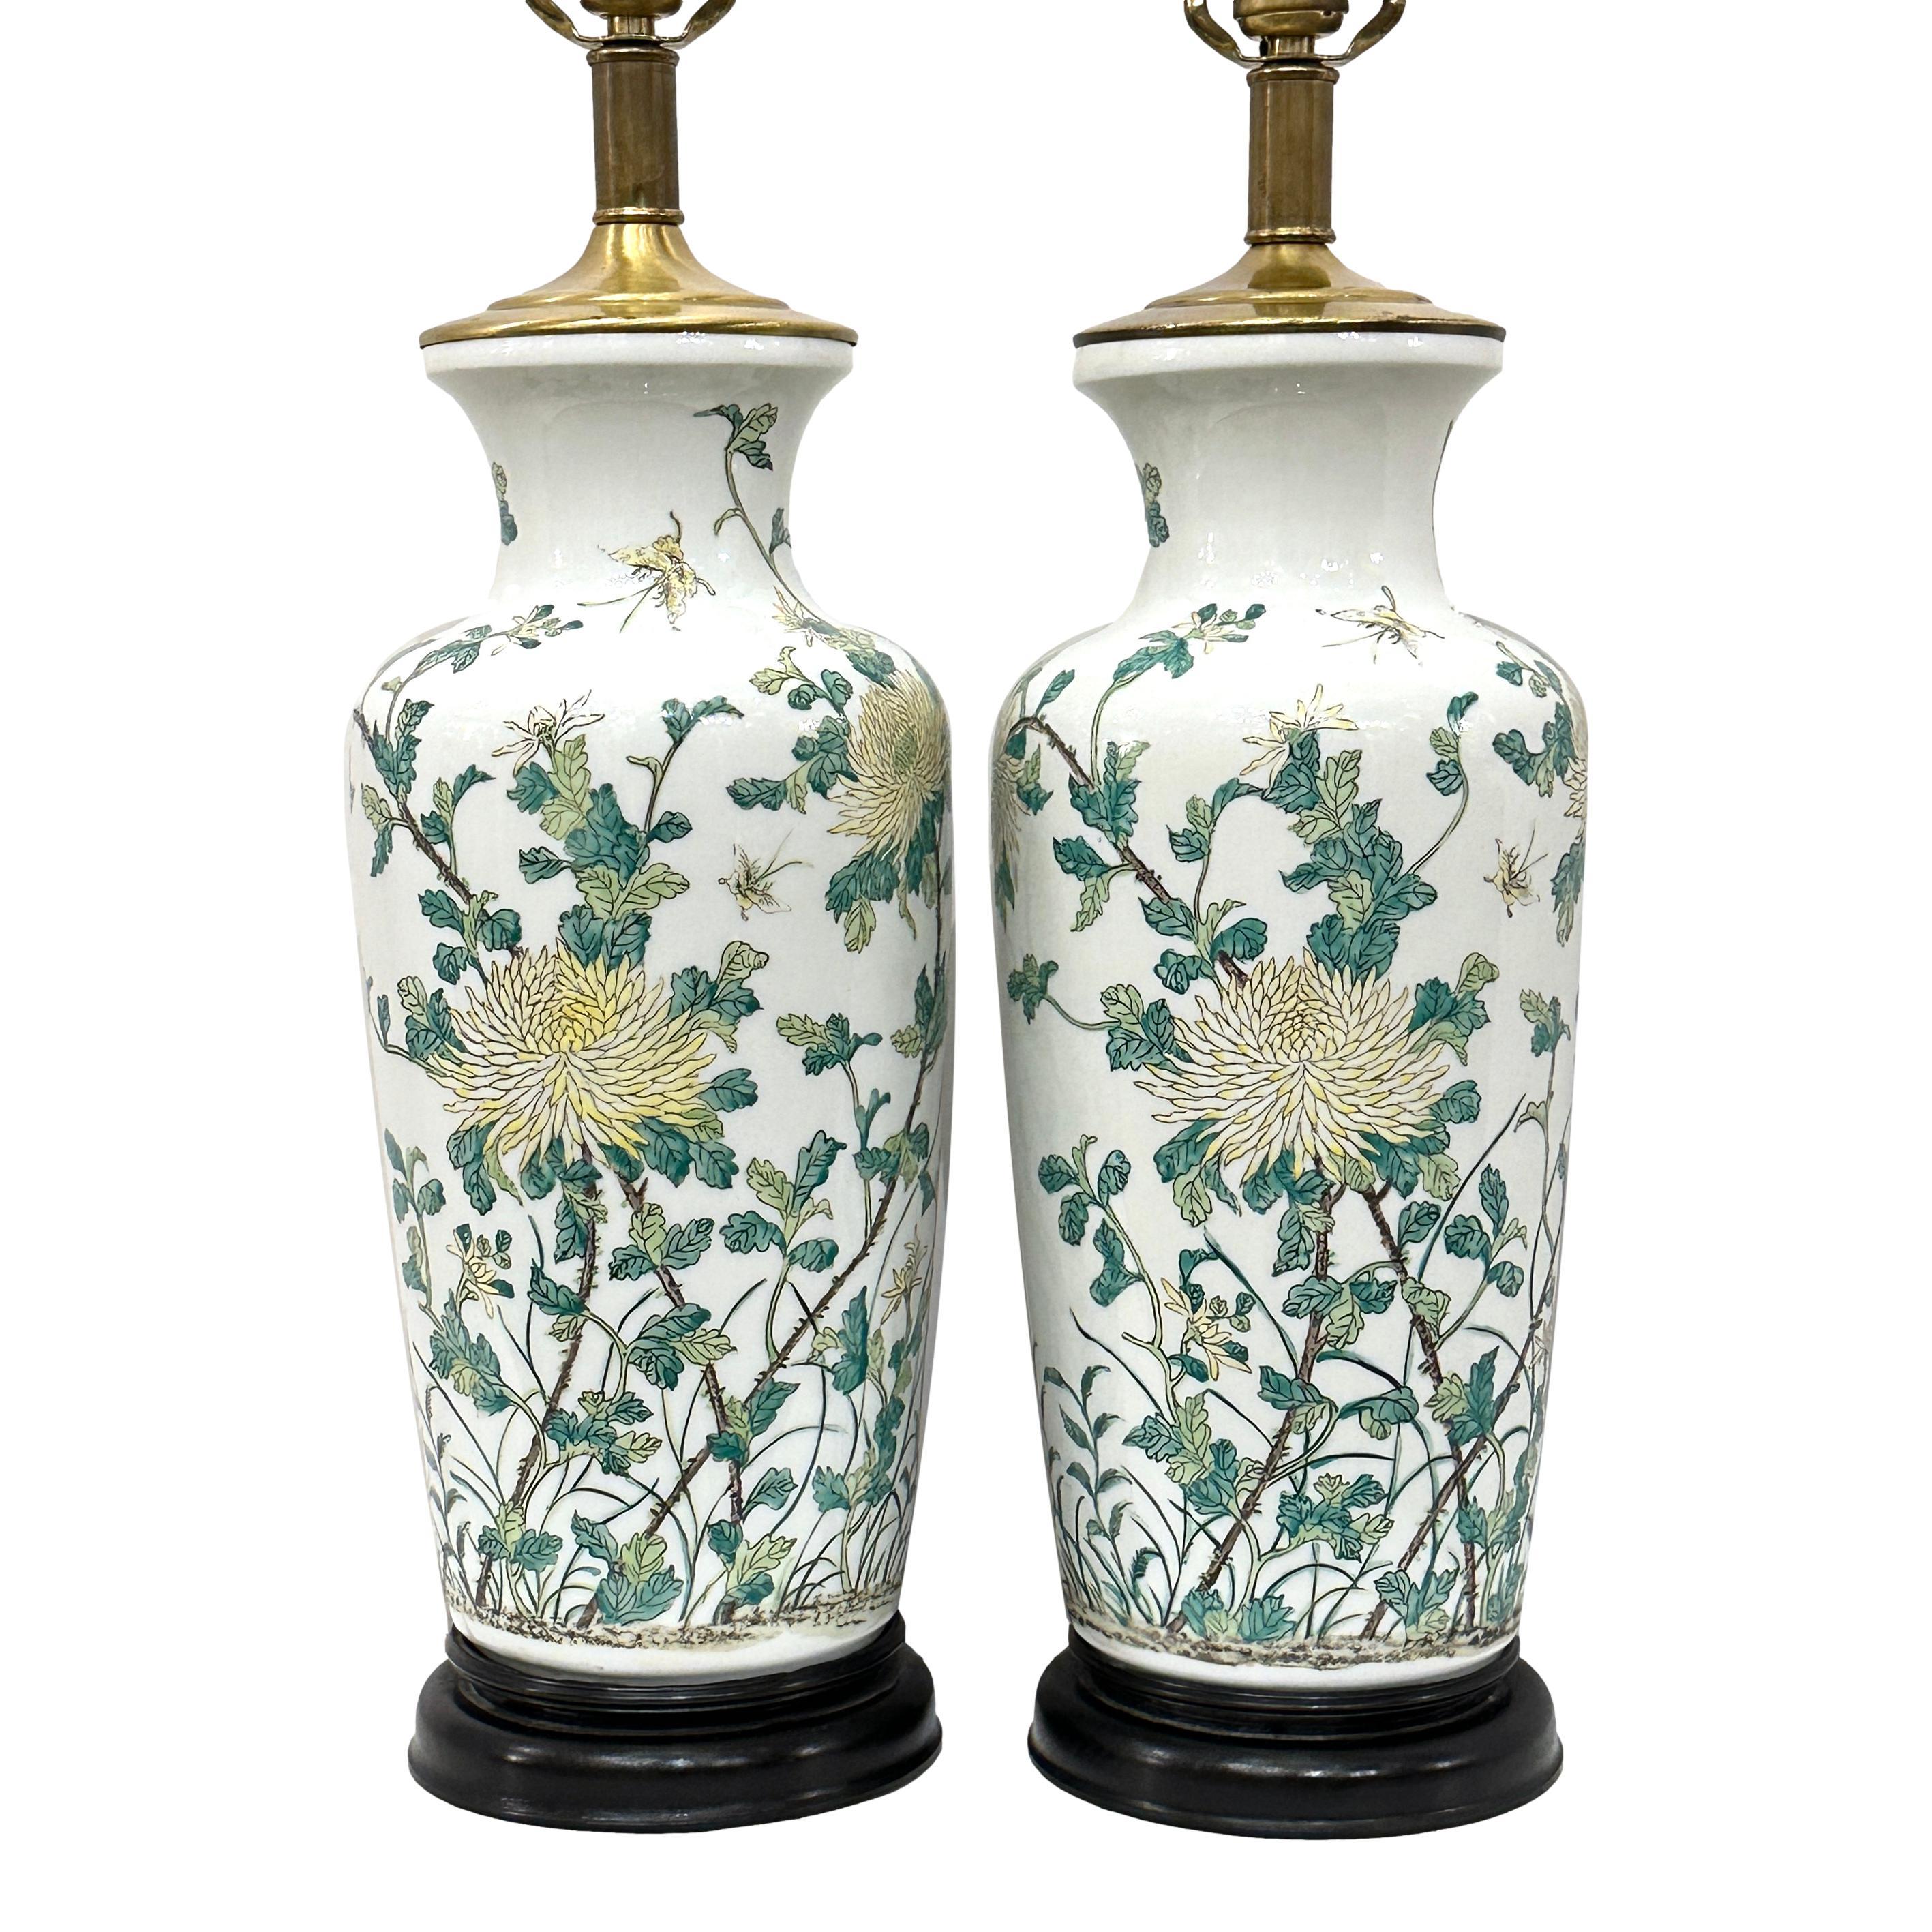 Pair of circa 1960's Chinese porcelain lamps with floral motif.

Measurements:
Height of body: 20